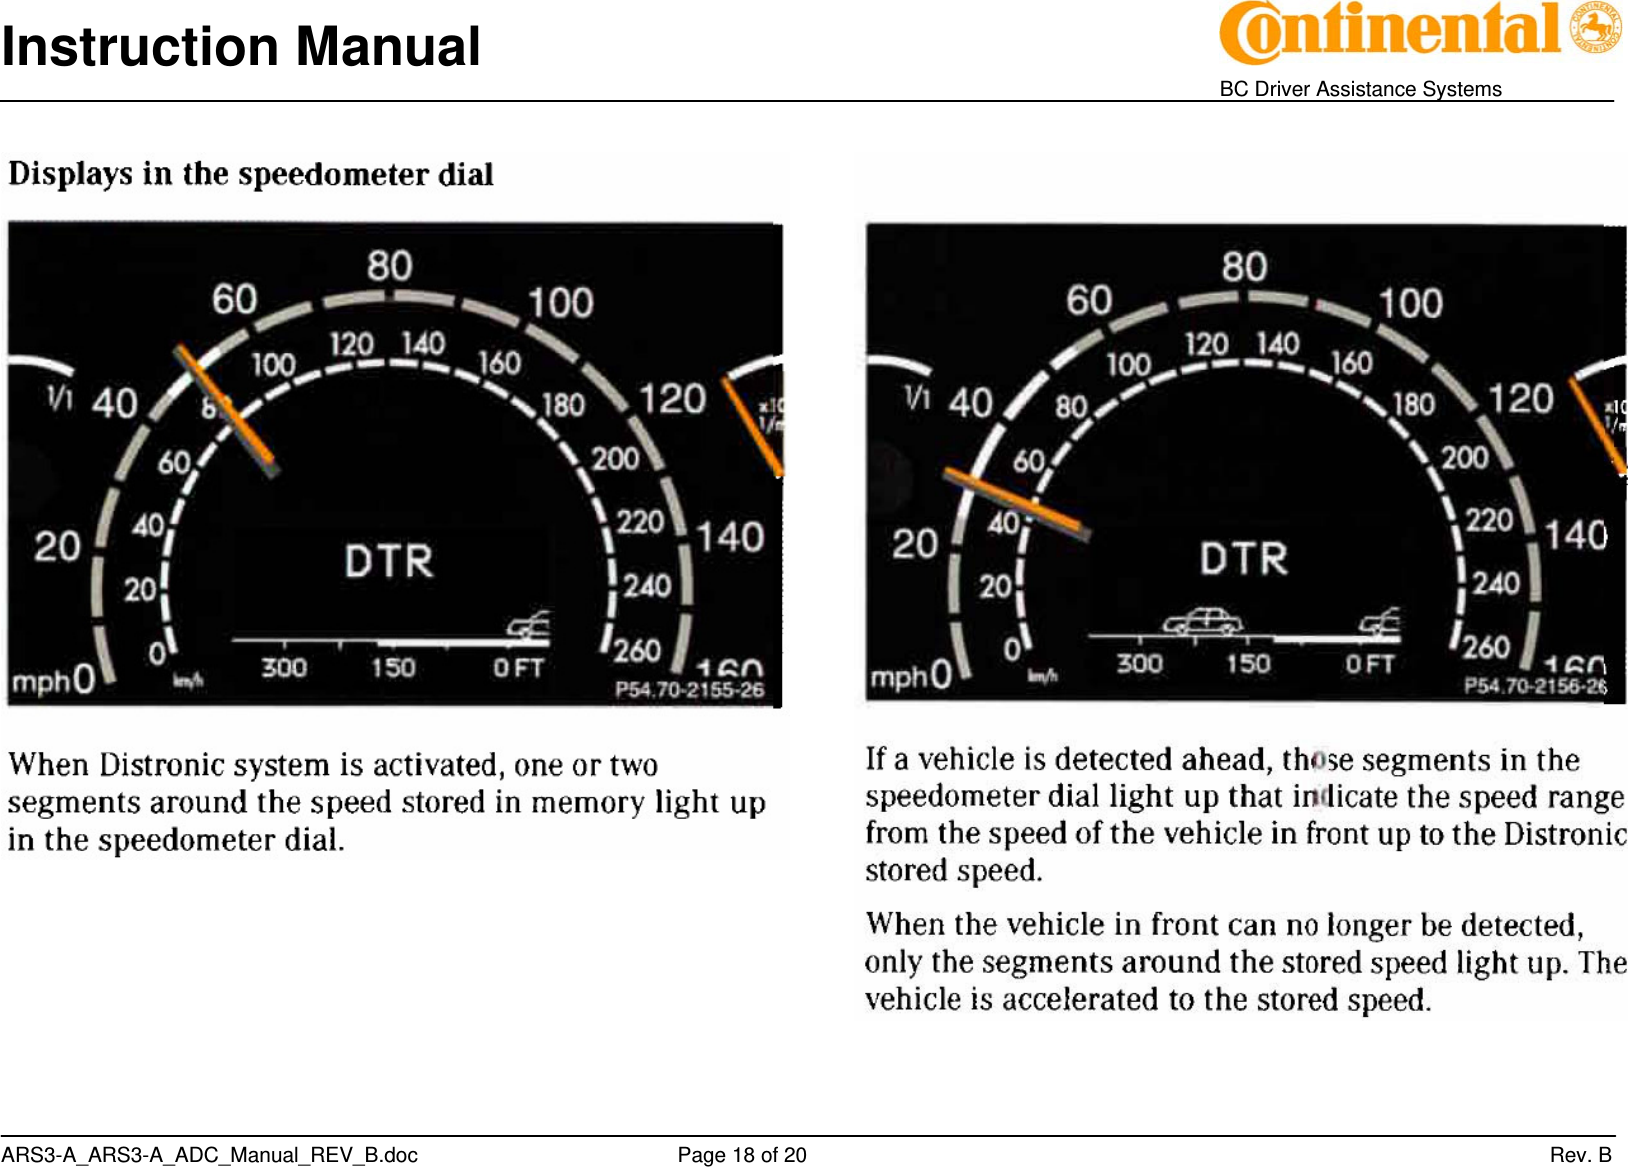 Instruction Manual    BC Driver Assistance Systems ARS3-A_ARS3-A_ADC_Manual_REV_B.doc     Page 18 of 20                 Rev. B   